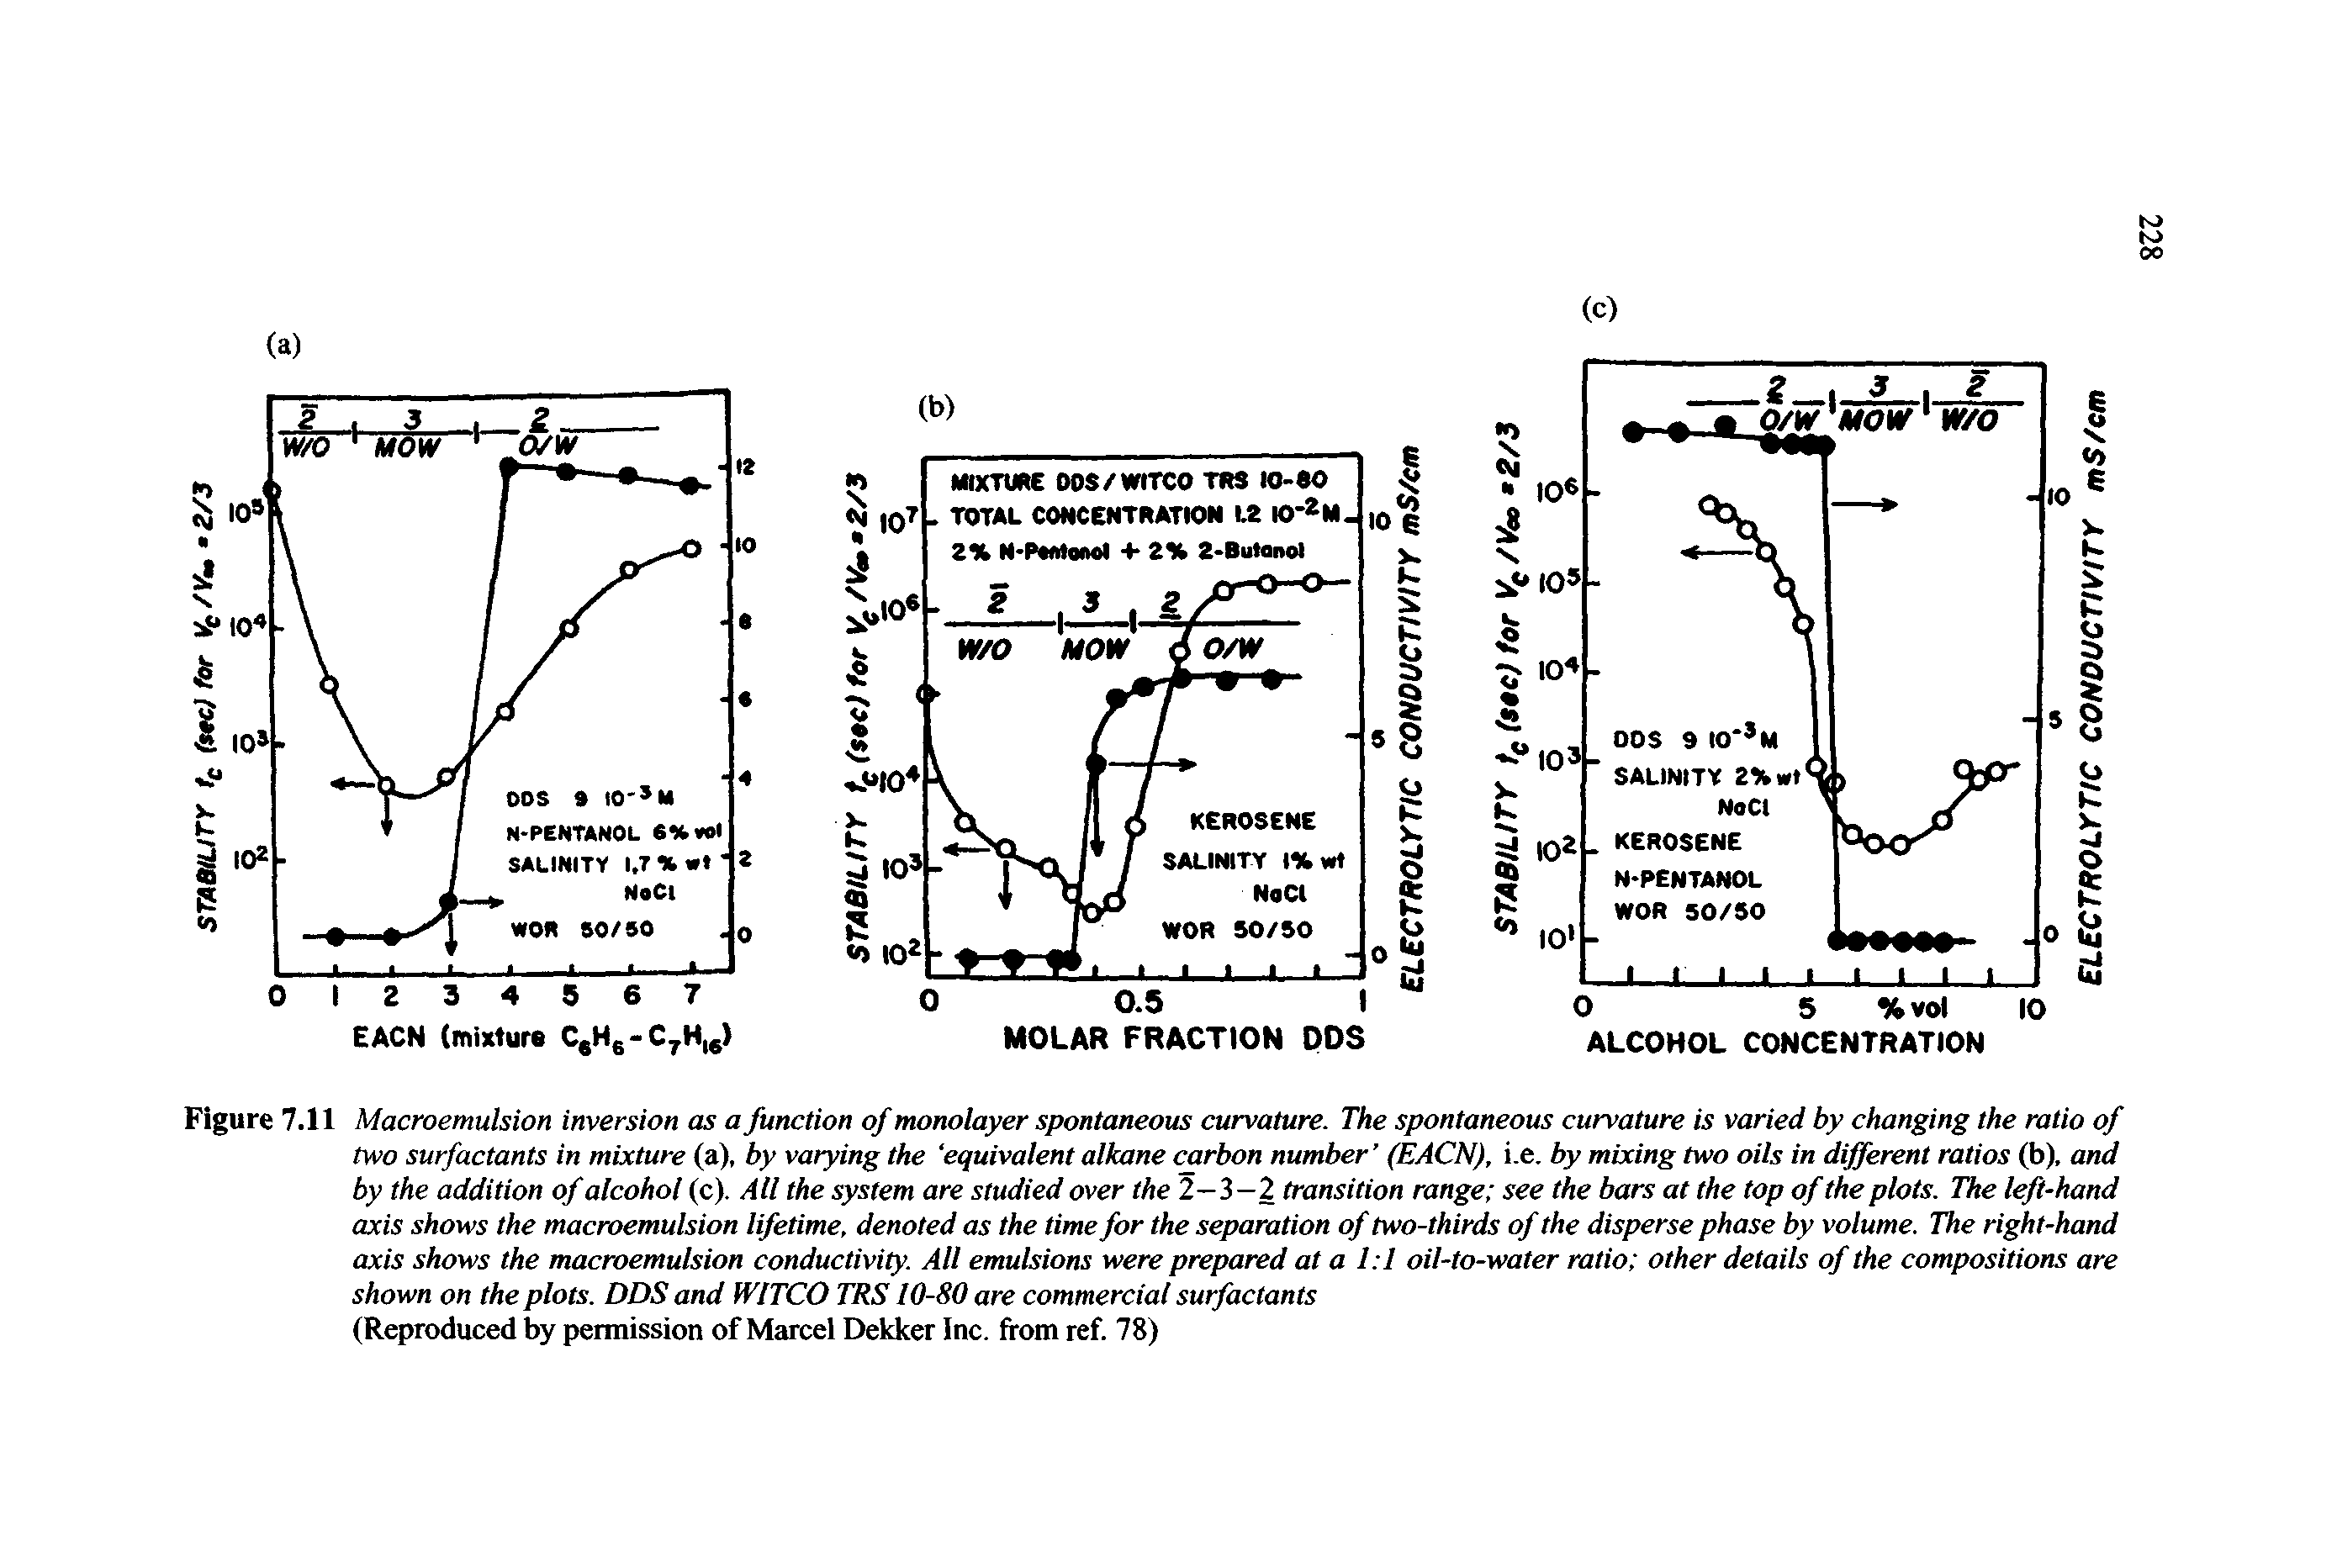 Figure 7.11 Macroemulsion inversion as a function of monolayer spontaneous curvature. The spontaneous curvature is varied by changing the ratio of two surfactants in mixture (a), by varying the equivalent alkane carbon number (EACN), i.e. by mixing two oils in different ratios (b). and by the addition of alcohol (c). All the system are studied over the 2—3—2 transition range see the bars at the top of the plots. The left-hand axis shows the macroemulsion lifetime, denoted as the time for the separation of two-thirds of the disperse phase by volume. The right-hand axis shows the macroemulsion conductivity. All emulsions were prepared at a 1 1 oil-to-water ratio other details of the compositions are shown on the plots. DDS and WITCO TRS10-80 are commercial surfactants (Reproduced by pemiission of Marcel Dekker Inc. from ref. 78)...